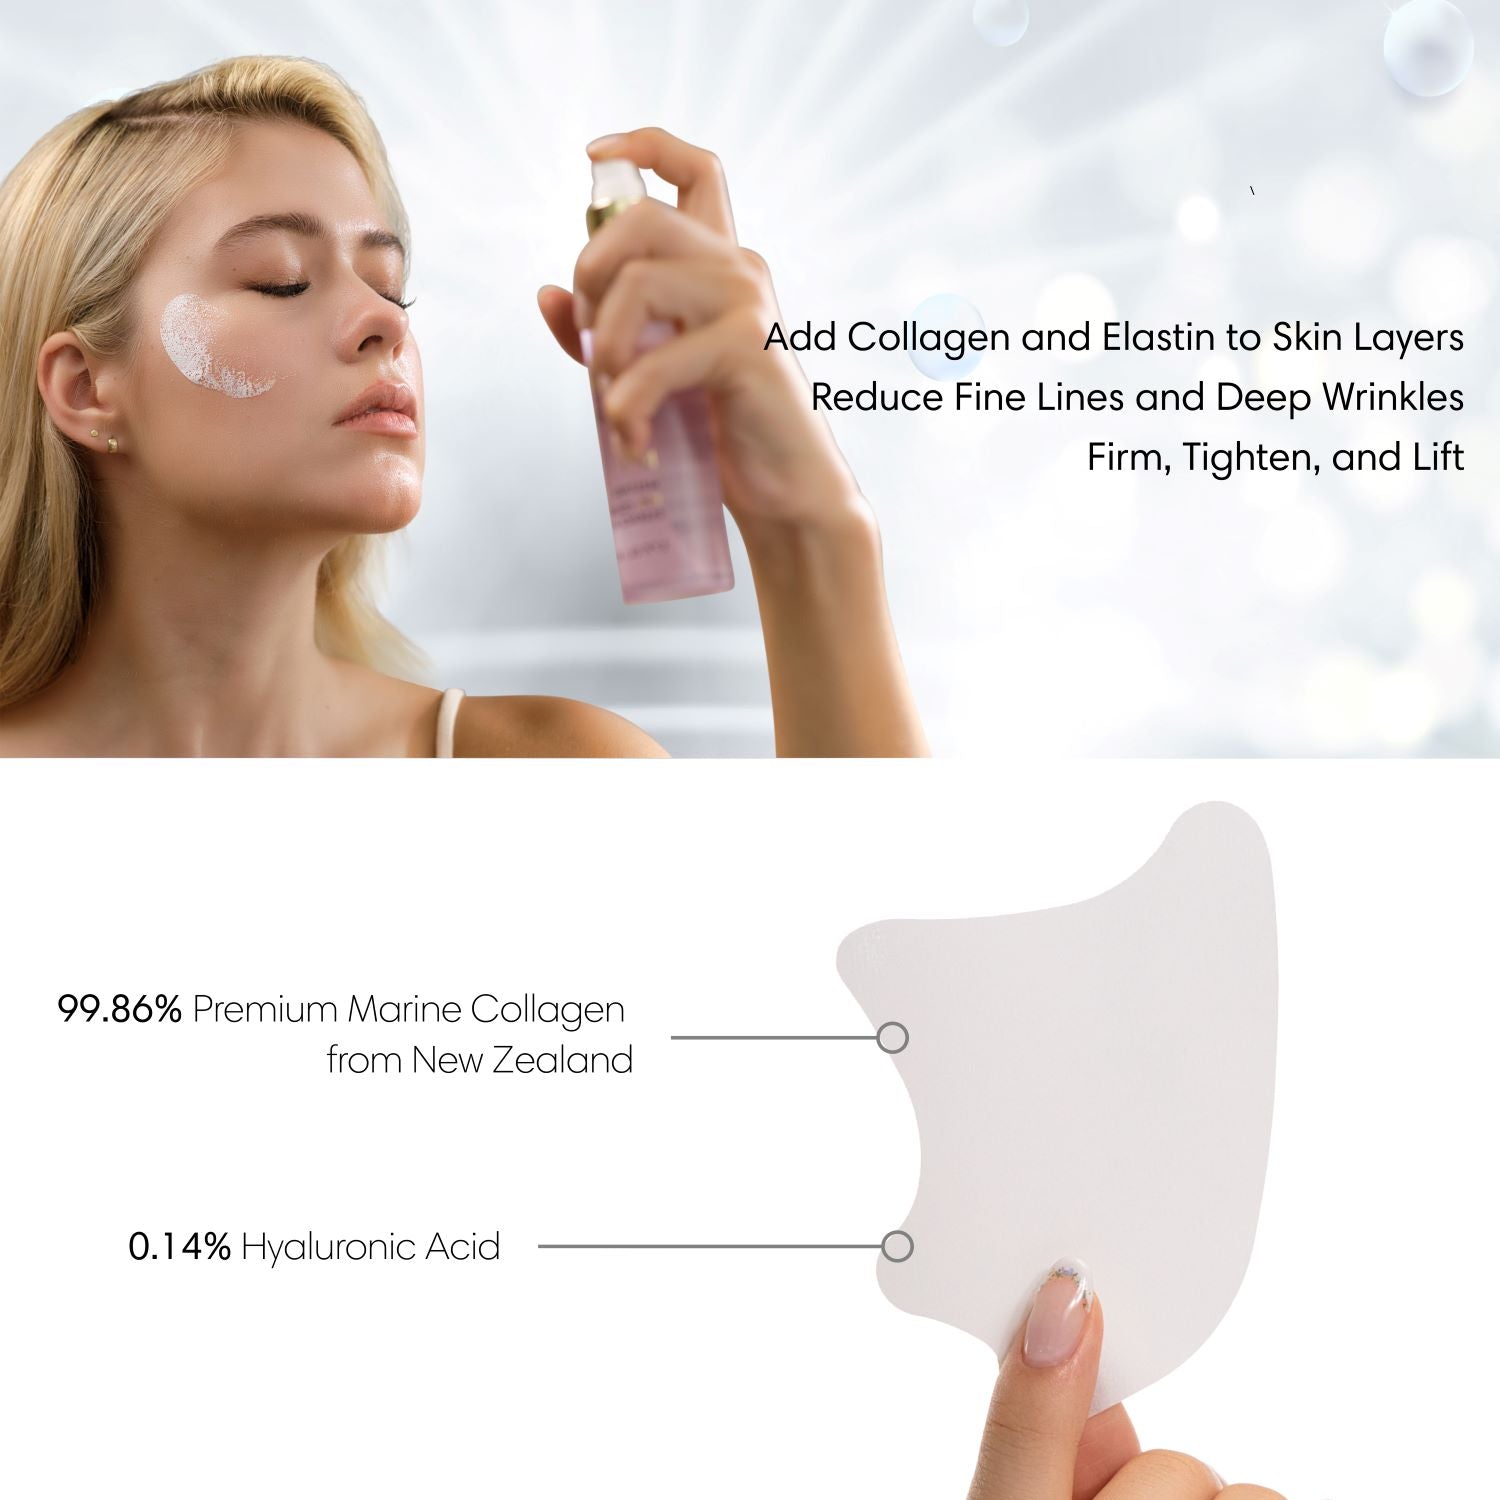 Brighca Melting Collagen Nanofiber Film for Anti-aging, face lifting, firming, hydrating